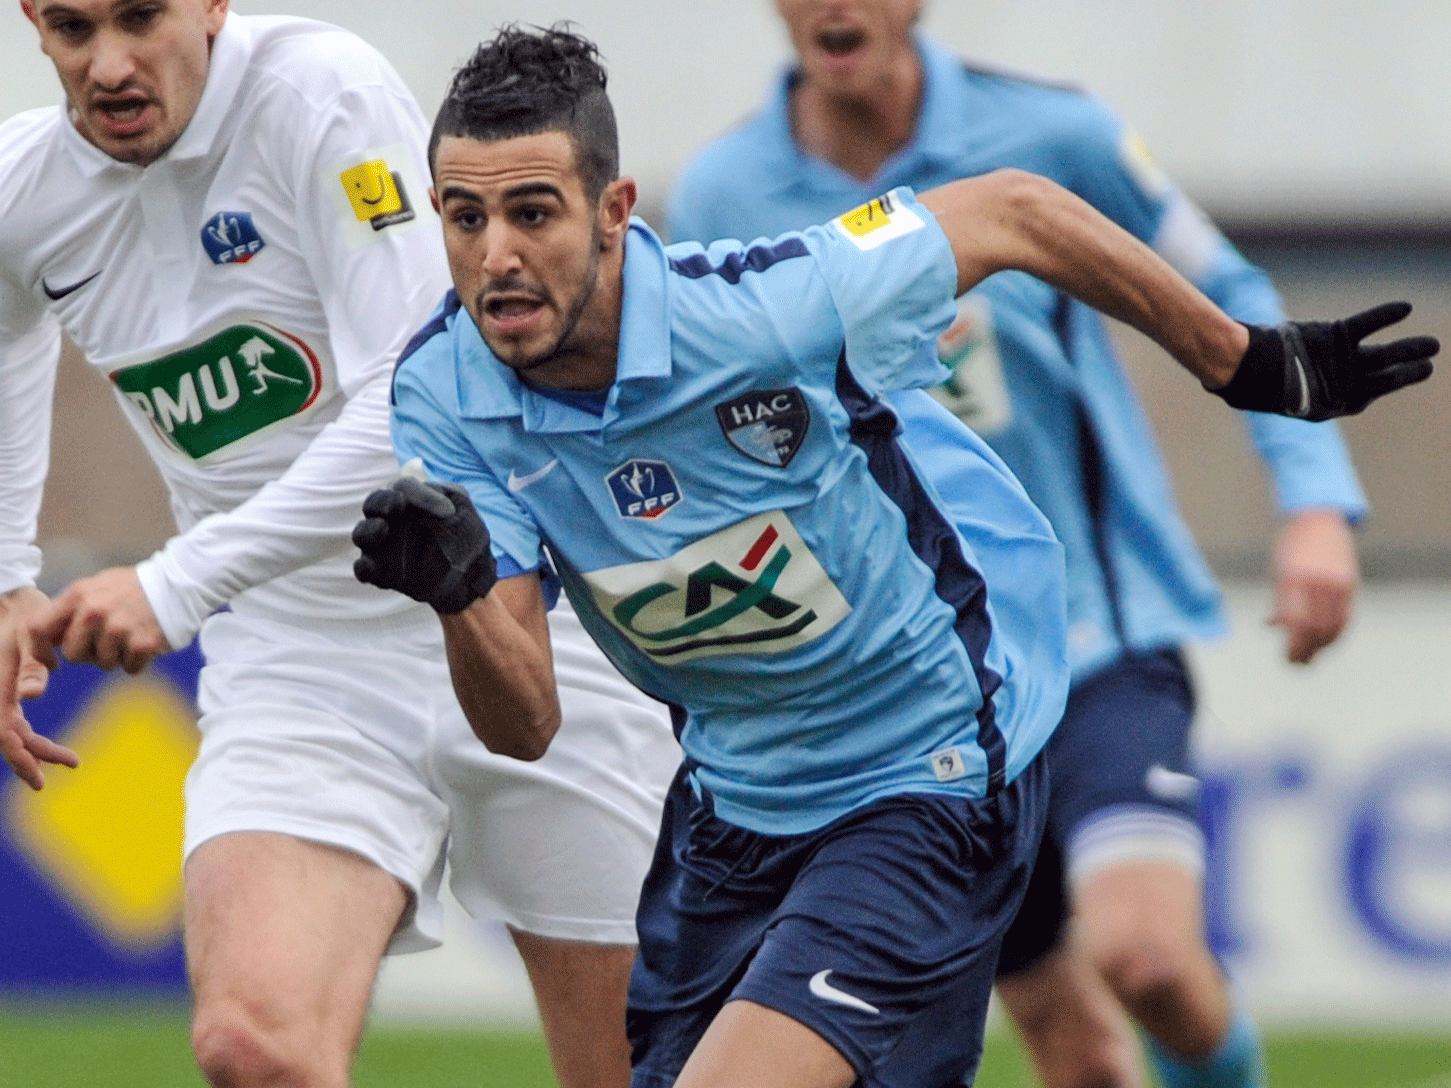 Leicester City are set to complete deal for Le Havre winger Riyad Mahrez